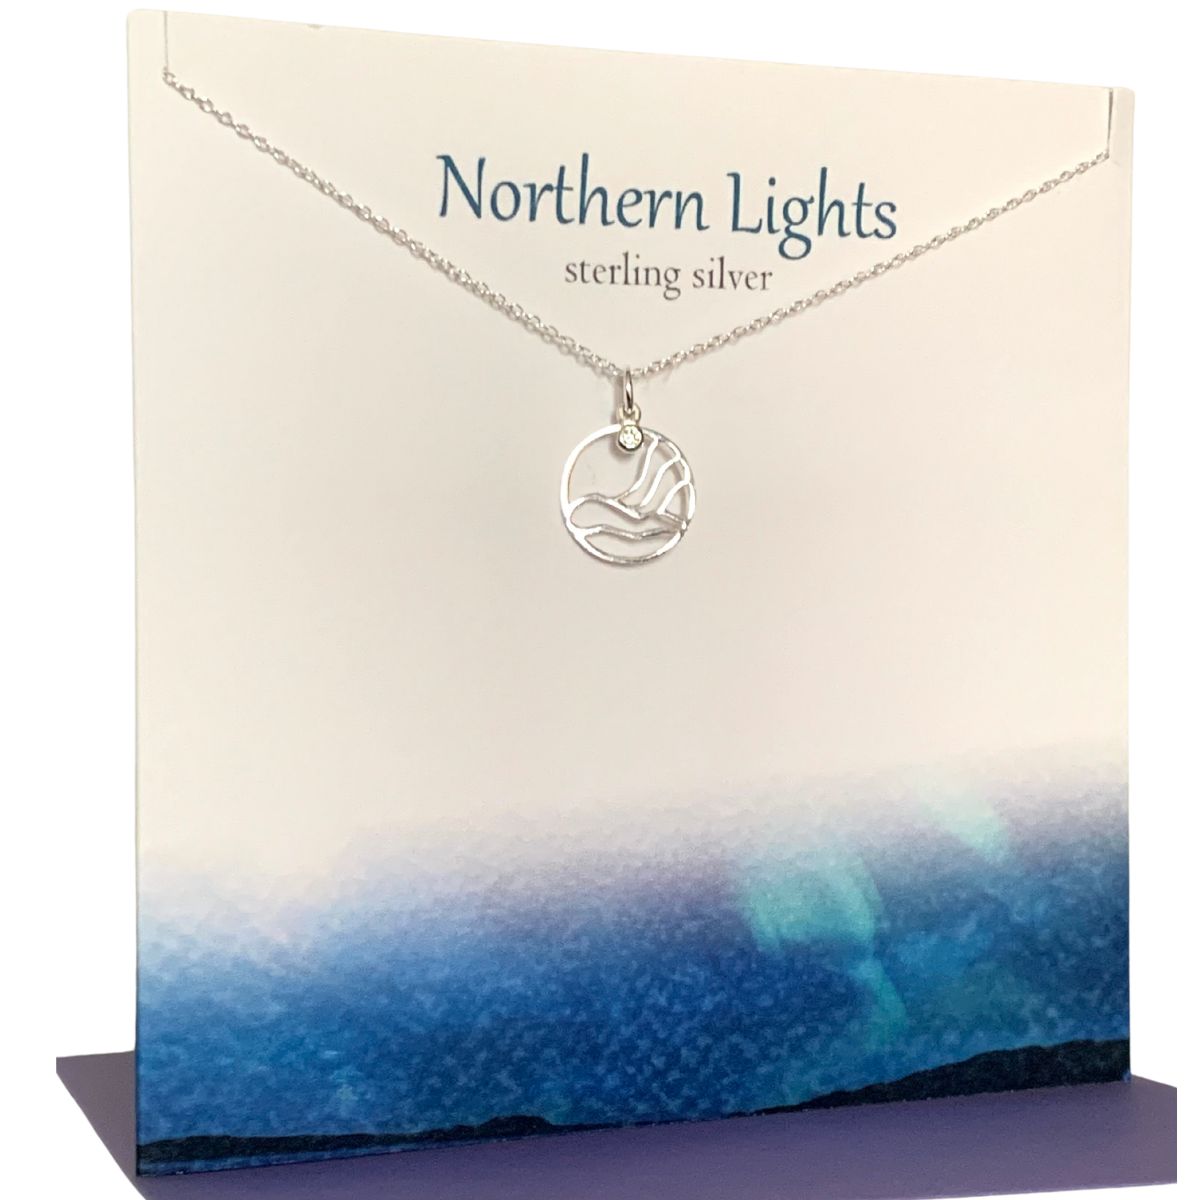 Round silver pendant necklace with small crystal on a silver chain. Presented on a gift card that says 'Northern Lights Sterling Silver'. There is a depiction of the aurora borealis along the bottom of the card